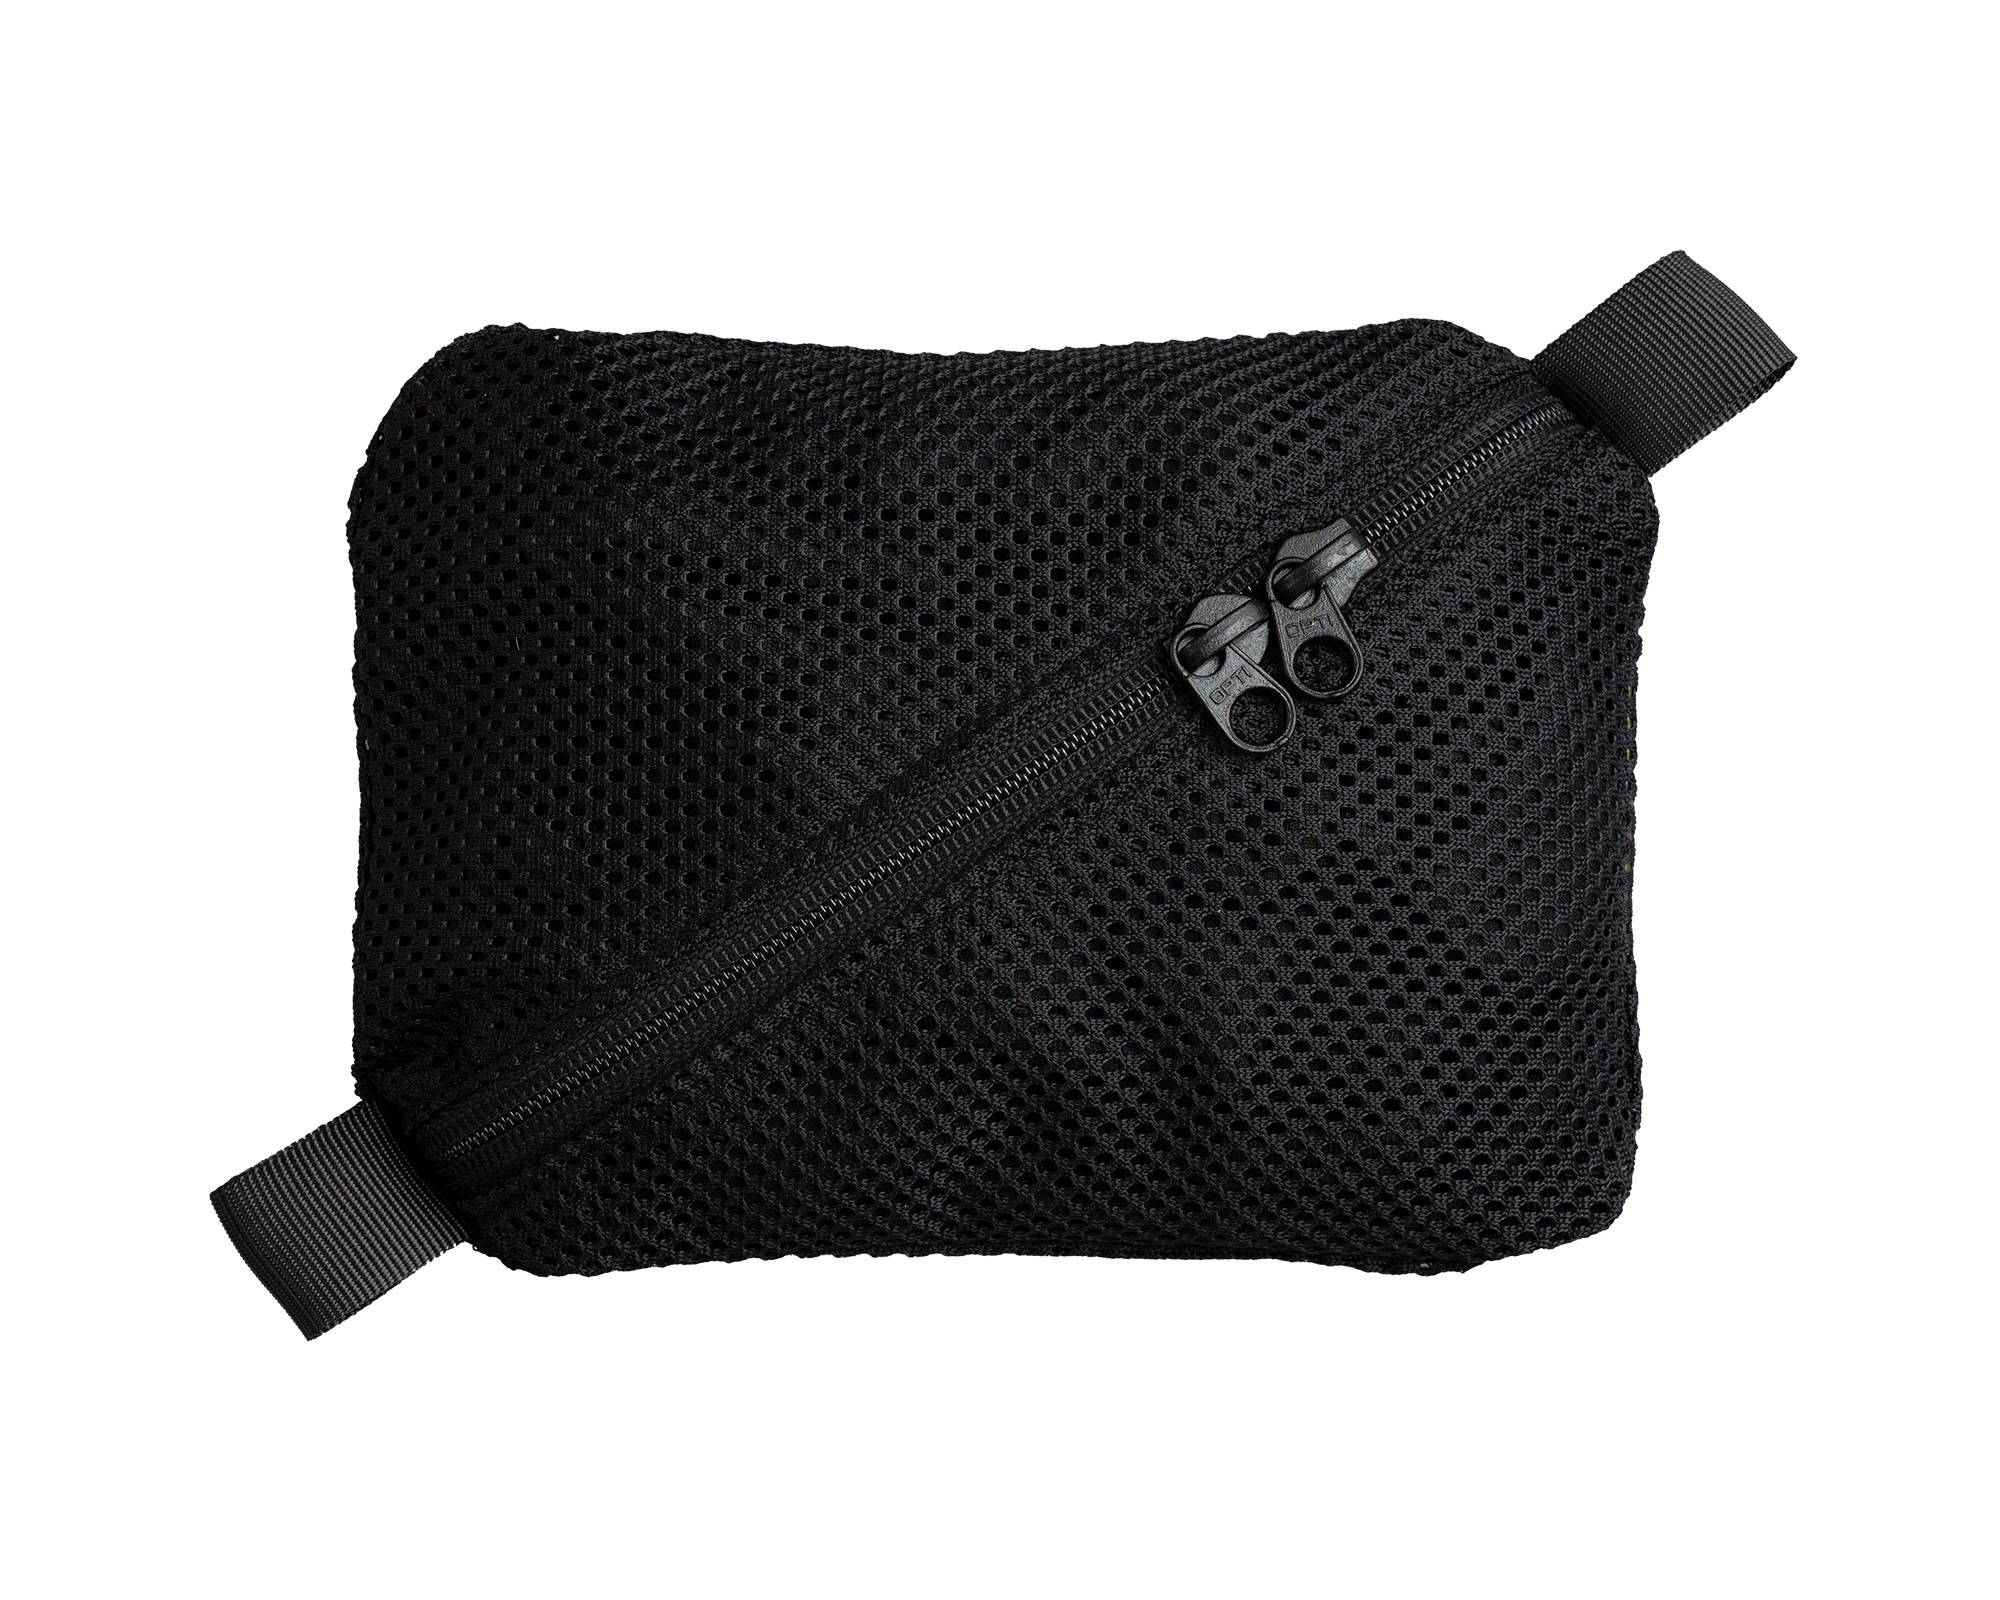 Bag-all Mini Pouch for Trinkets - Black